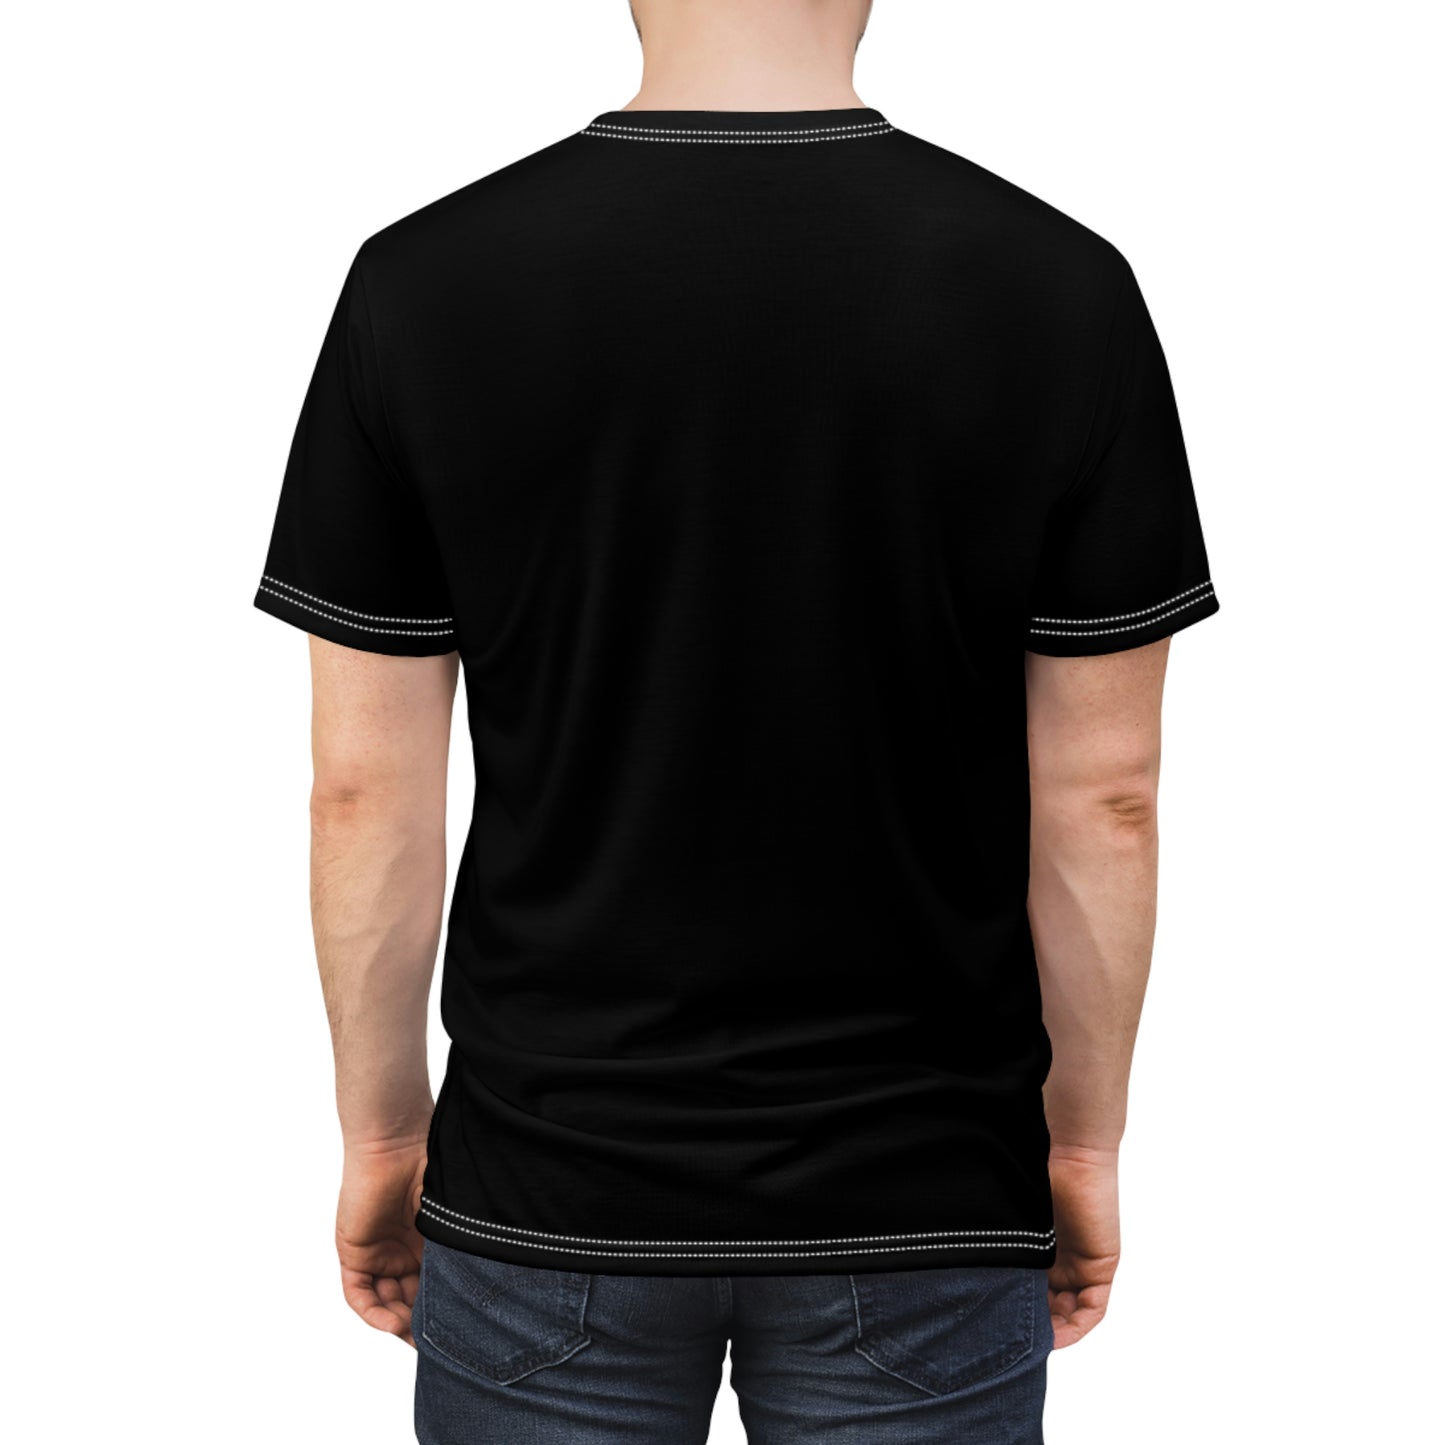 Beyond The Crack In The Sidewalk - Unisex All-Over Print Cut & Sew T-Shirt